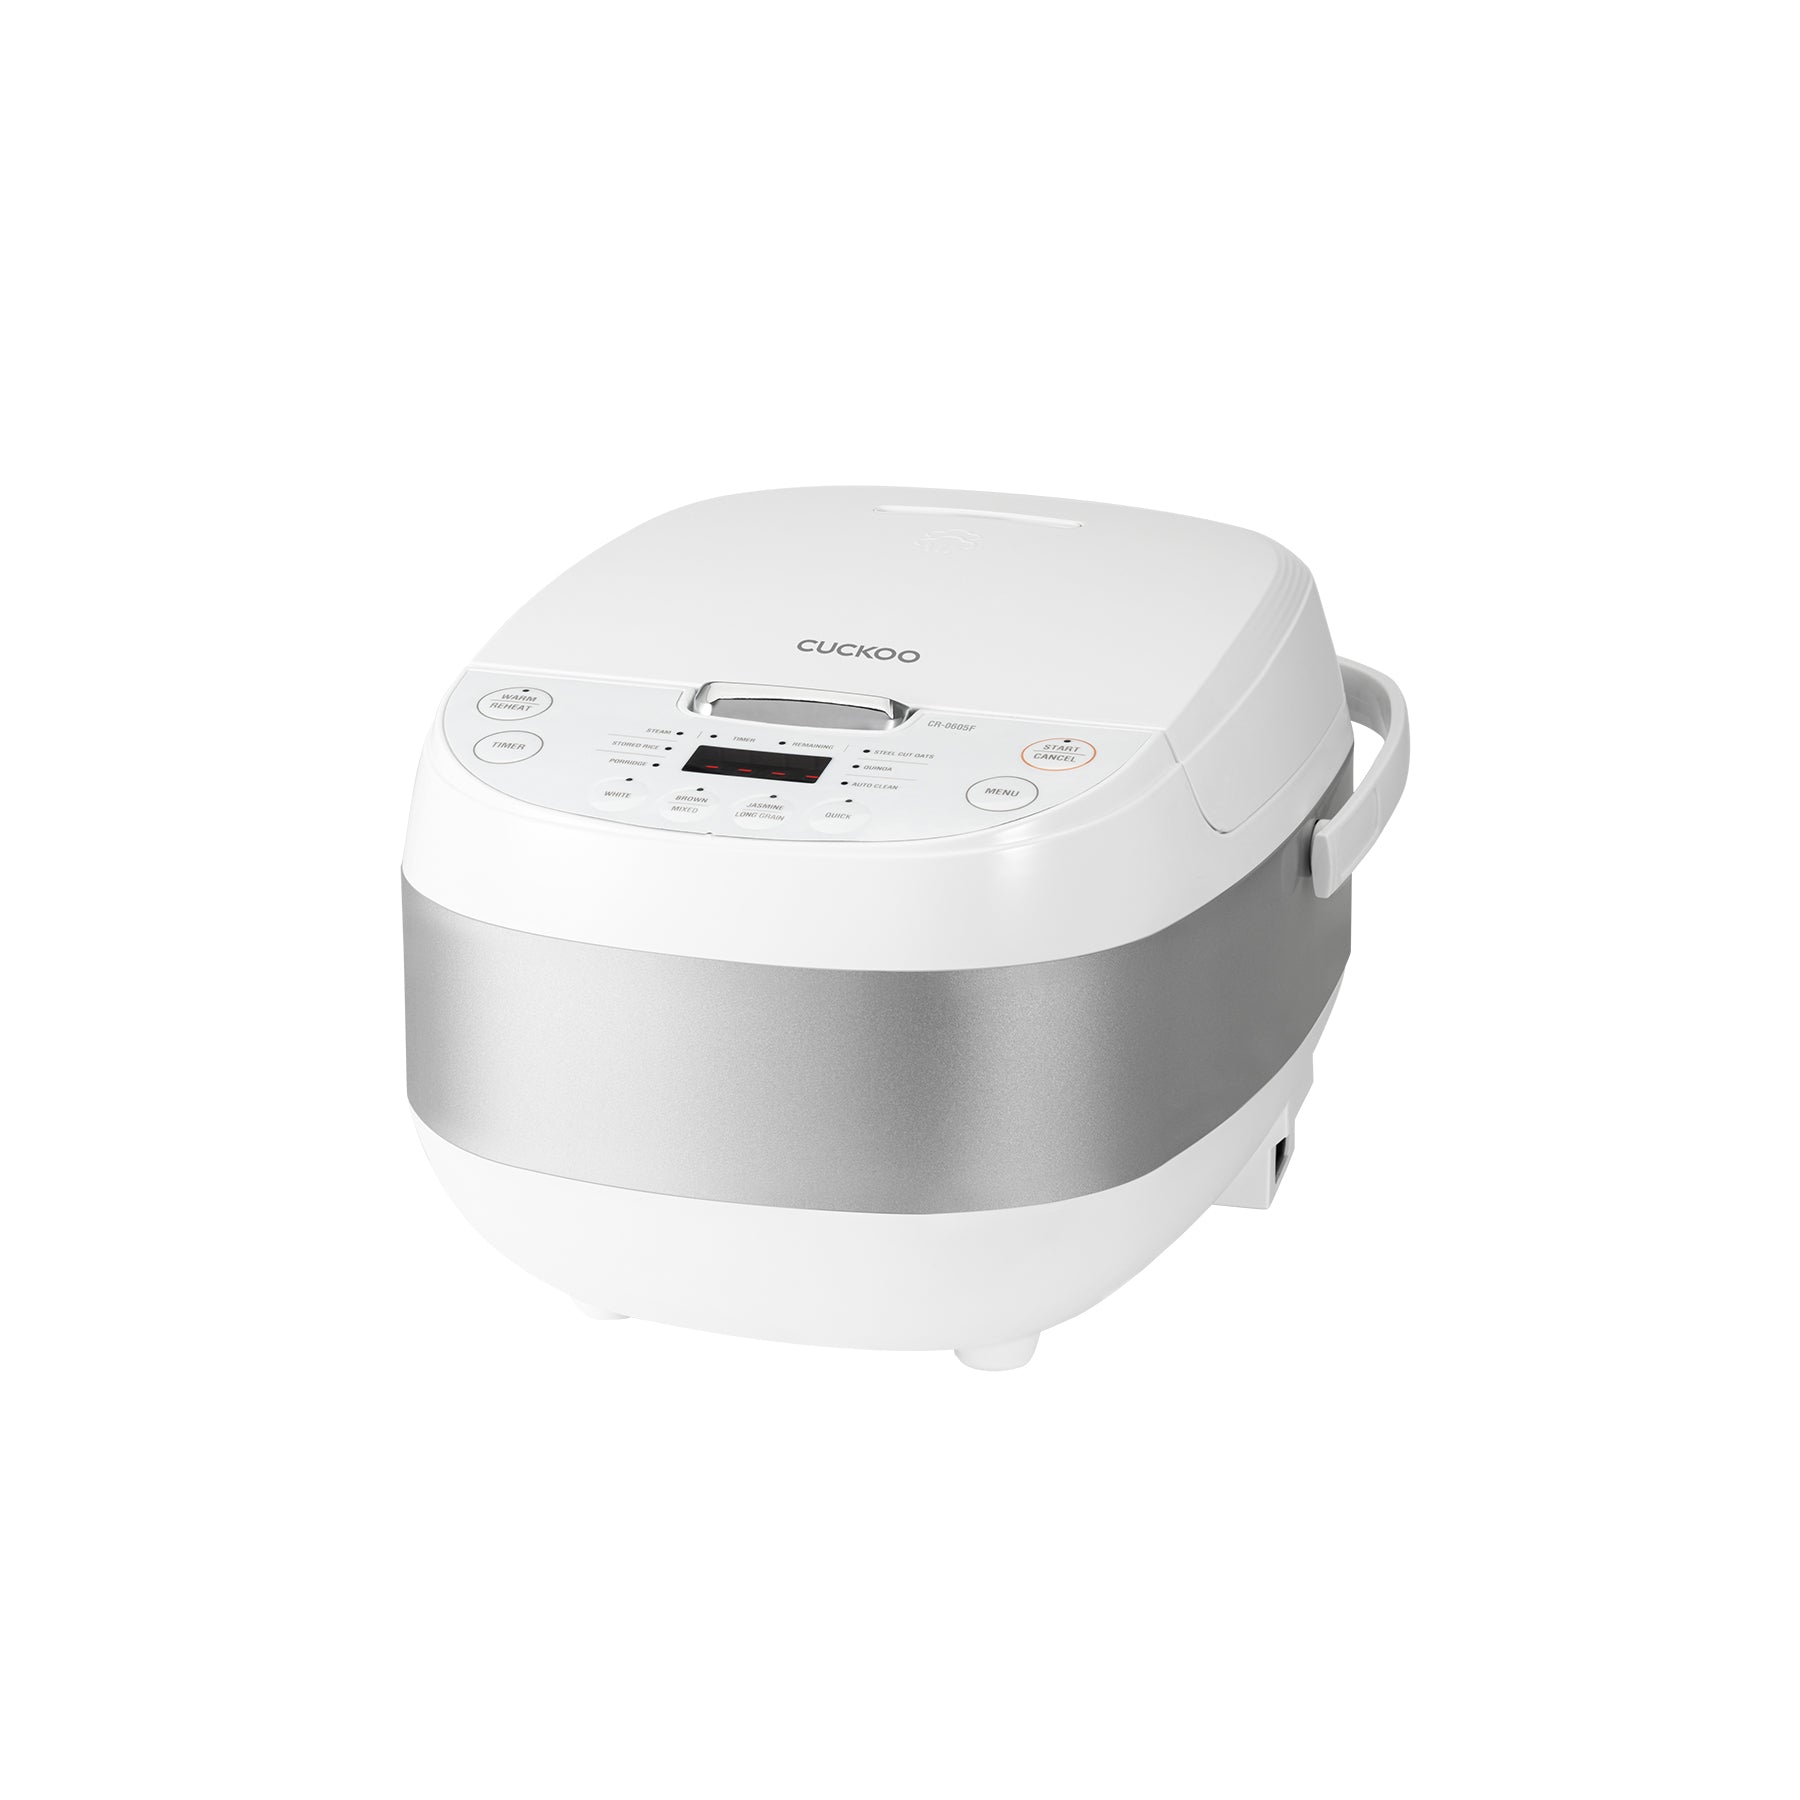 INTRODUCING the 6-Cup Micom Rice Cooker from CUCKOO (CR-0675F) 